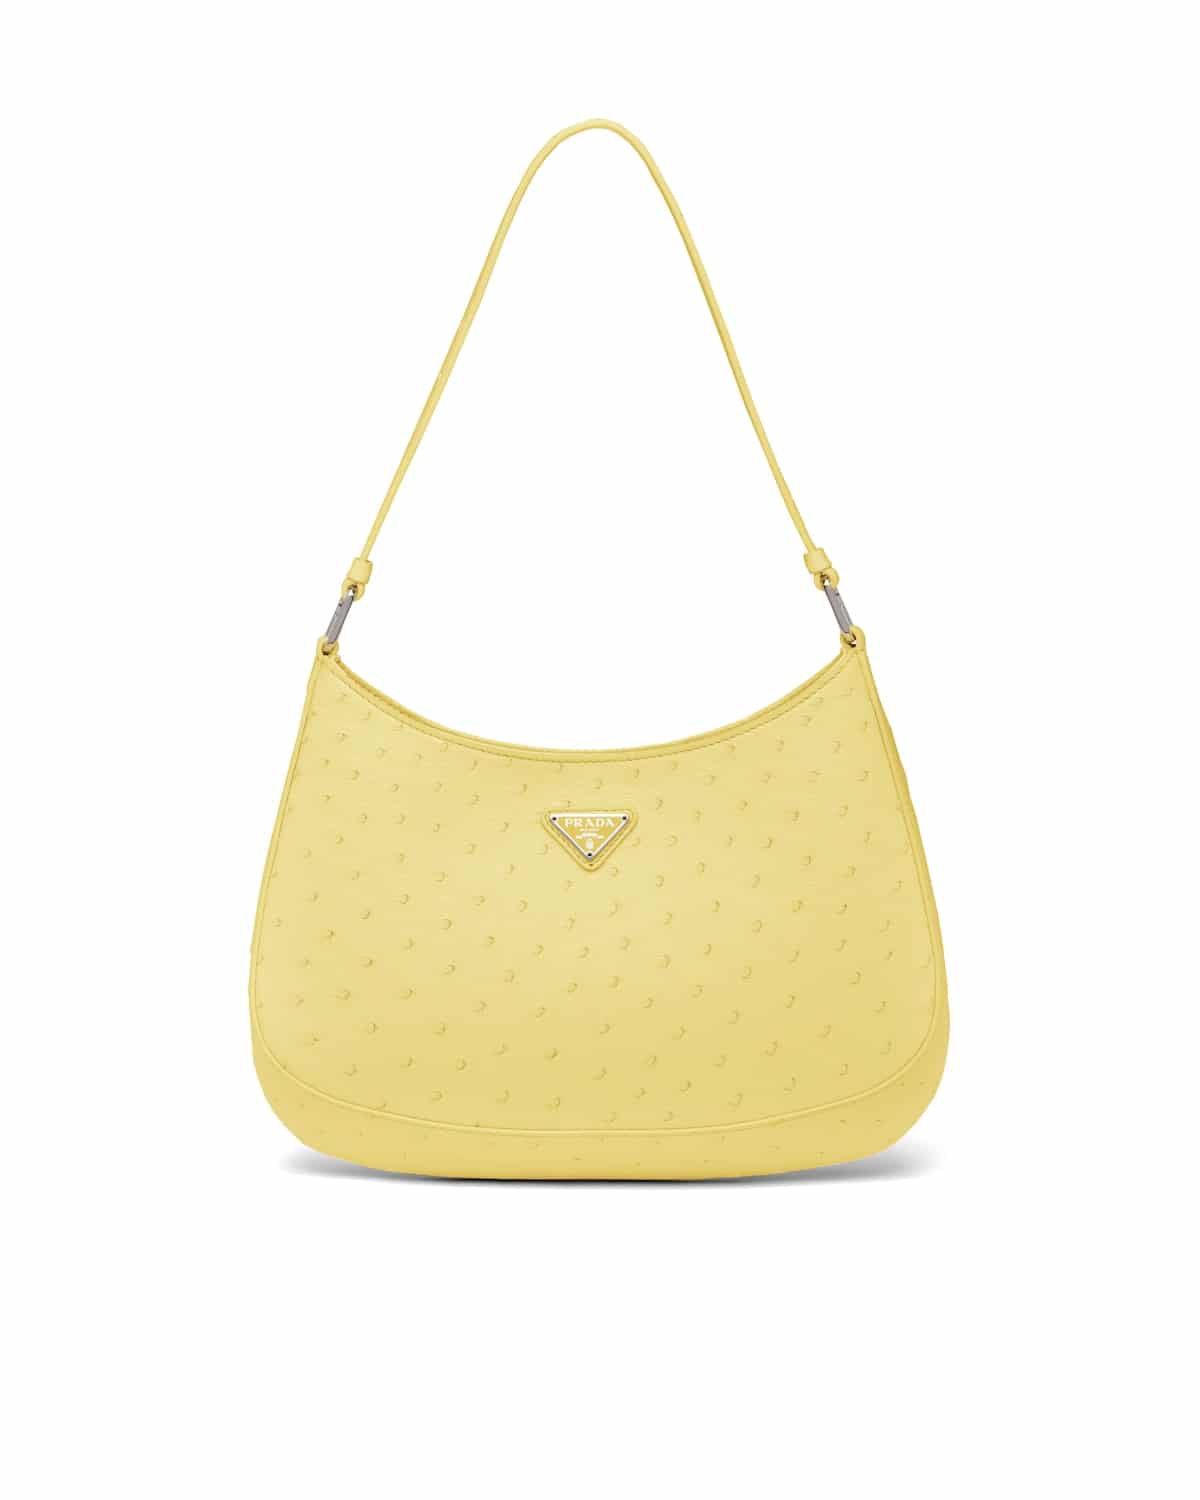 Prada Cleo Brushed Leather Shoulder Bag with Flap 1BD311, Yellow, One Size